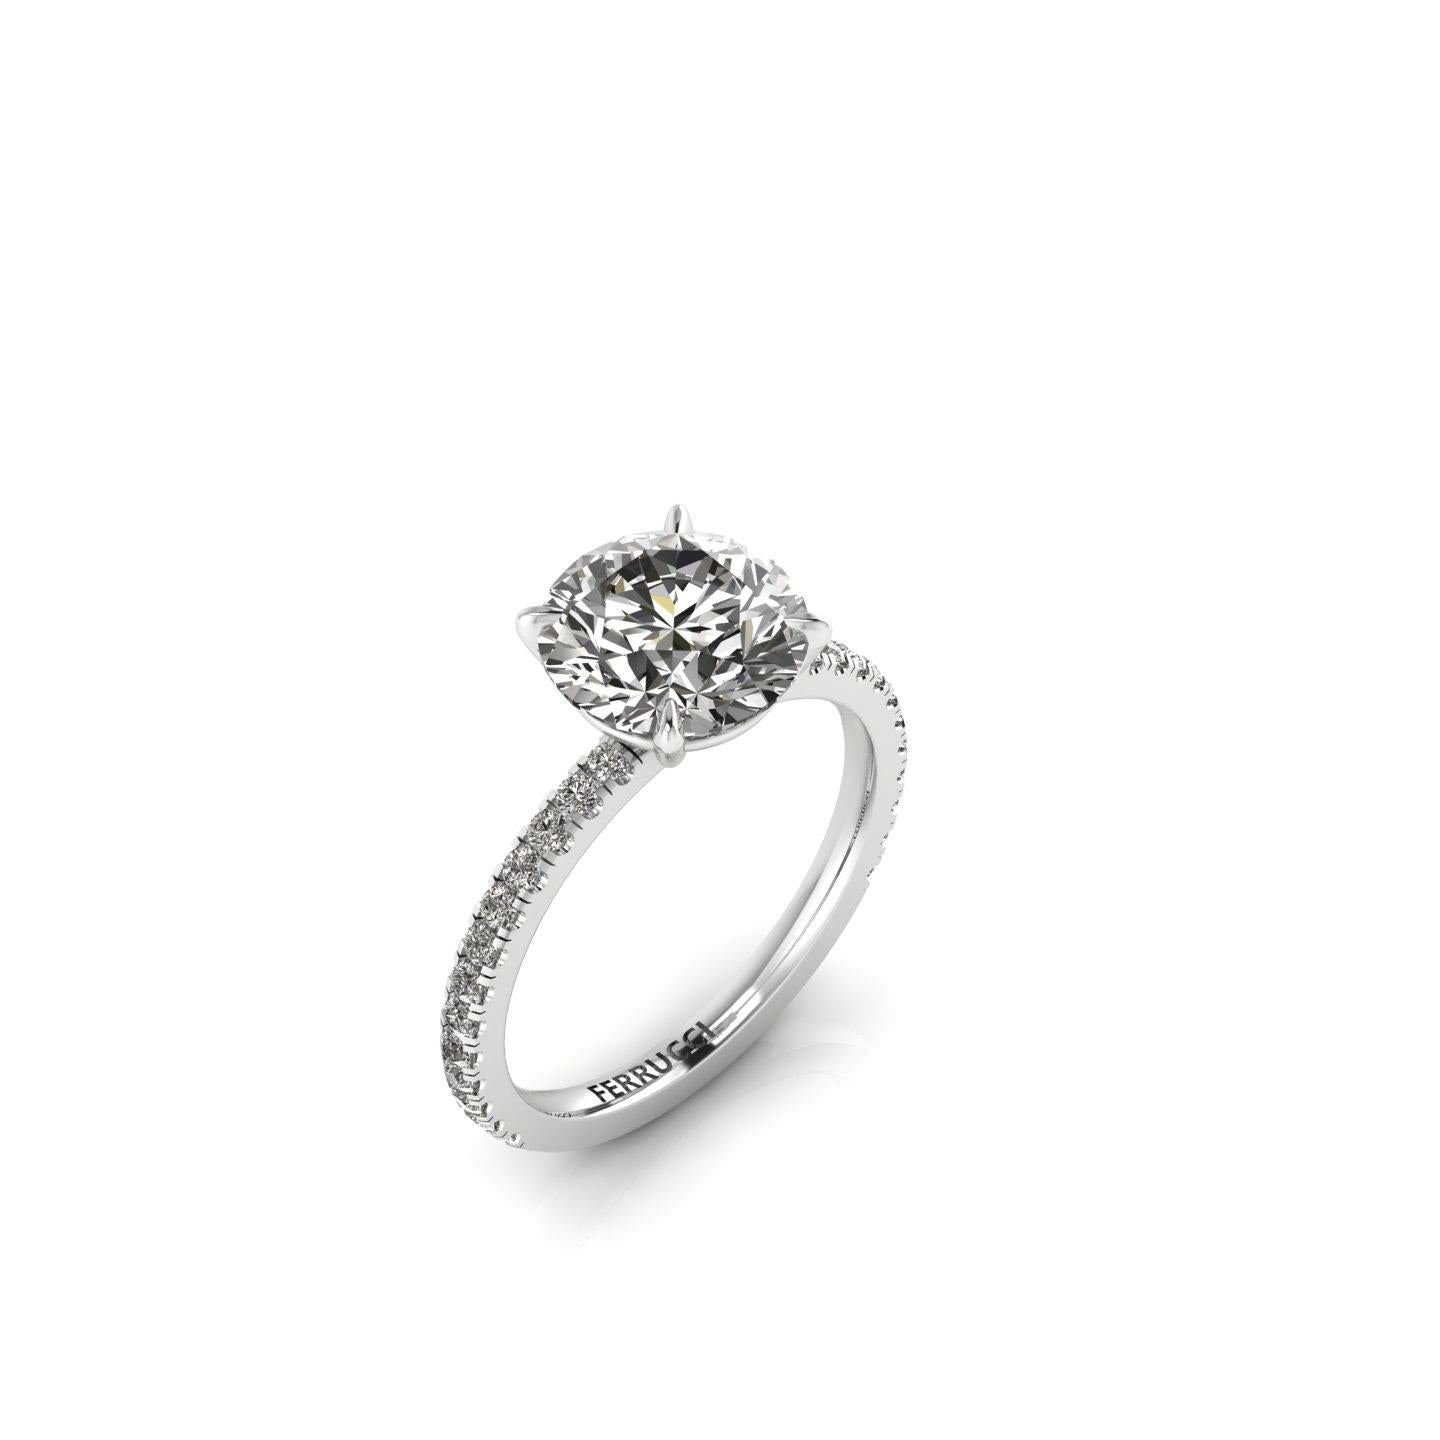 GIA Certified 2.39 Carat Round Diamond J color SI1 Clarity in Platinum 950.
White diamonds pave on the shank for a total of approximate 0.28 carats.
This stunning diamond ring is a low setting style.

Ring size 5  3/4 complimentary adjustable to